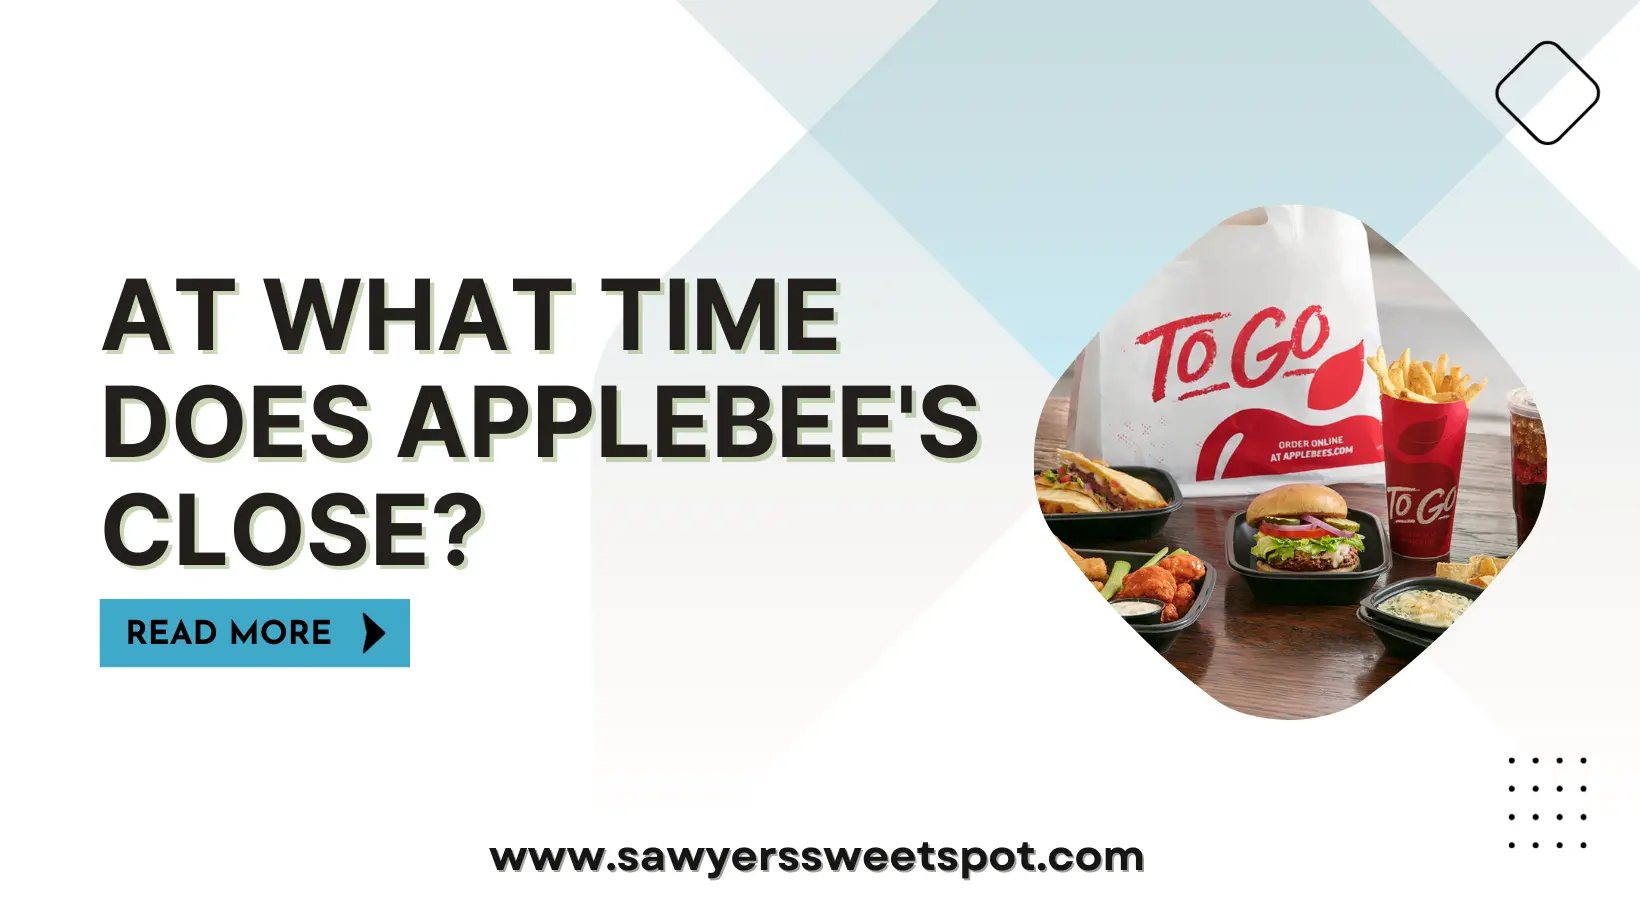 At What Time Does Applebee's Close?